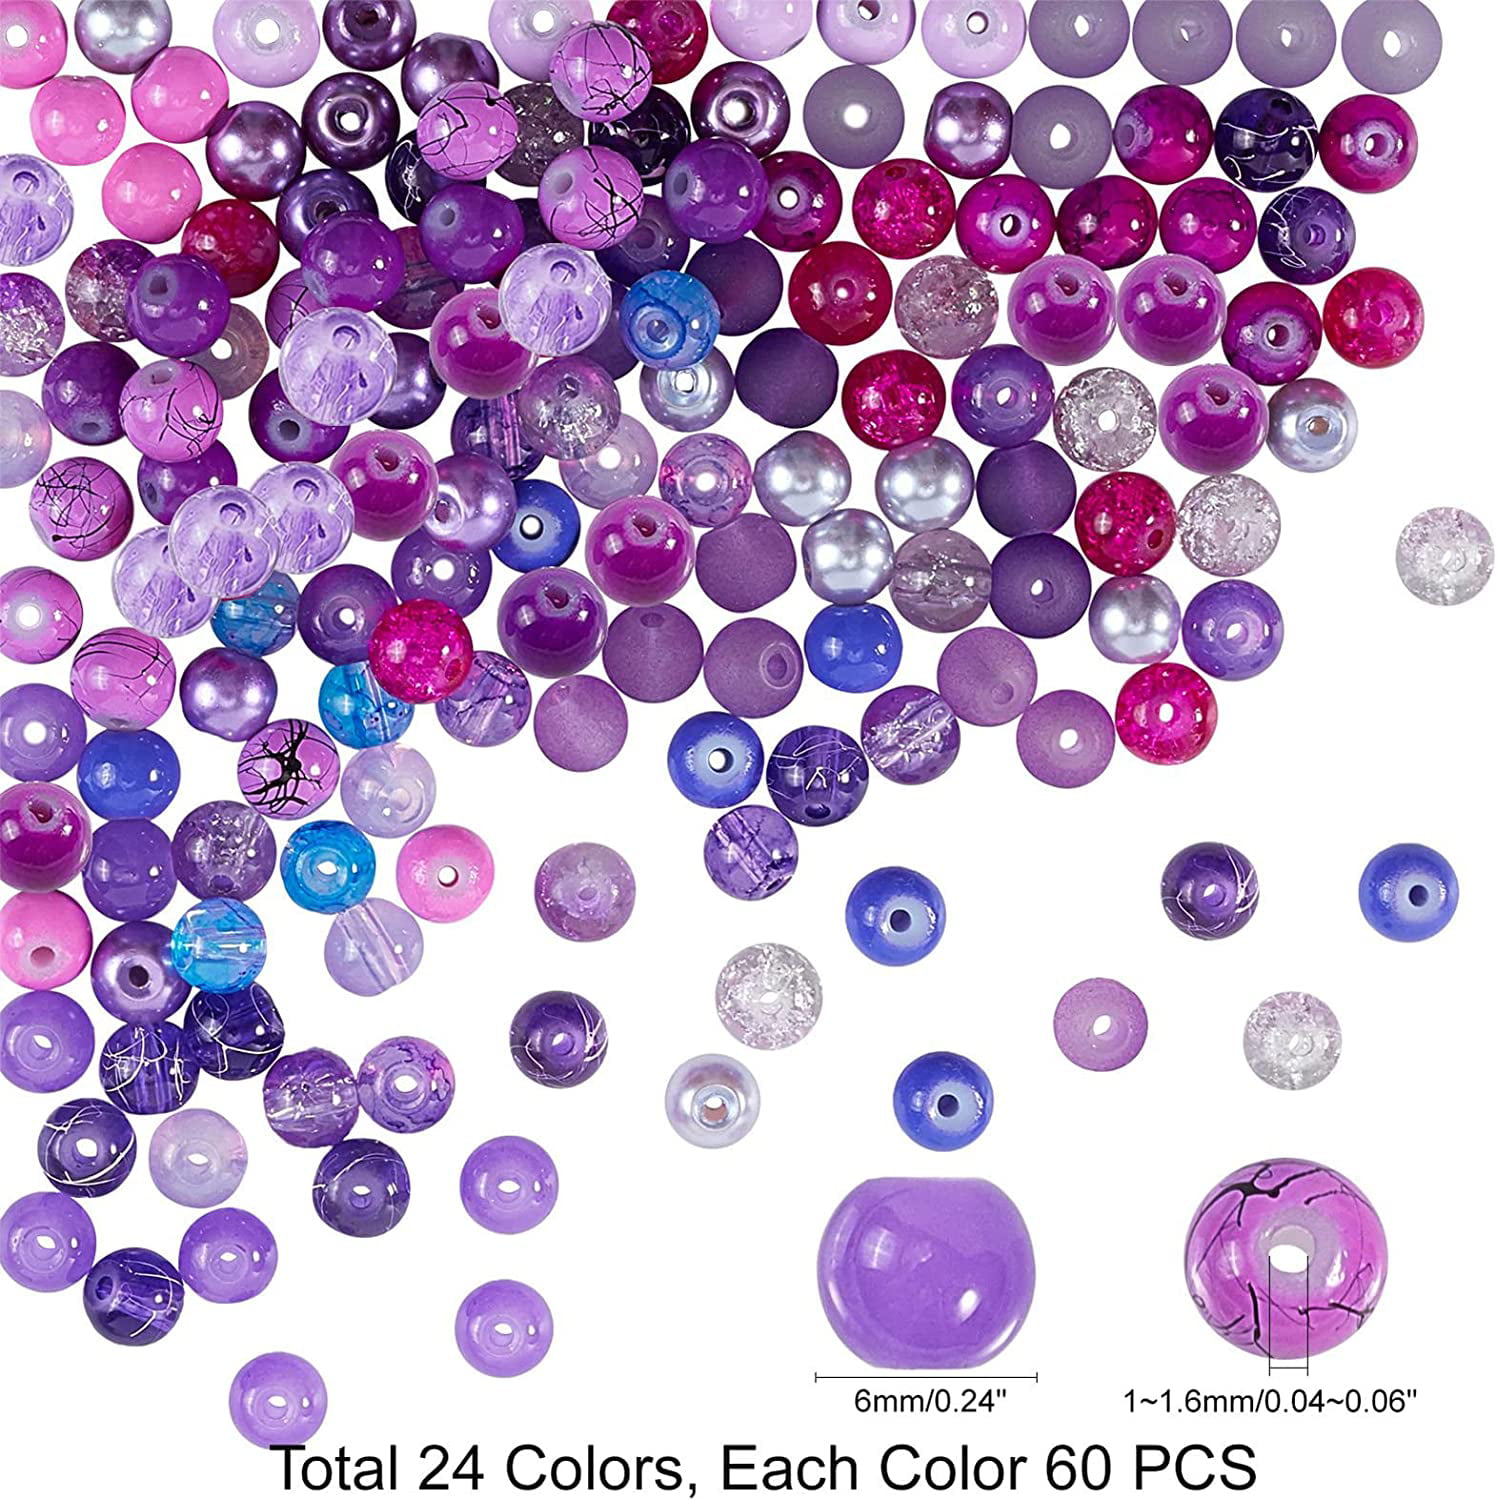 24 Color 6mm Glass Beads for Bracelet Jewelry Making 1440pcs Purple Round Spacer Loose Beads for Friendship Bracelets Necklaces Earring Making, Adult